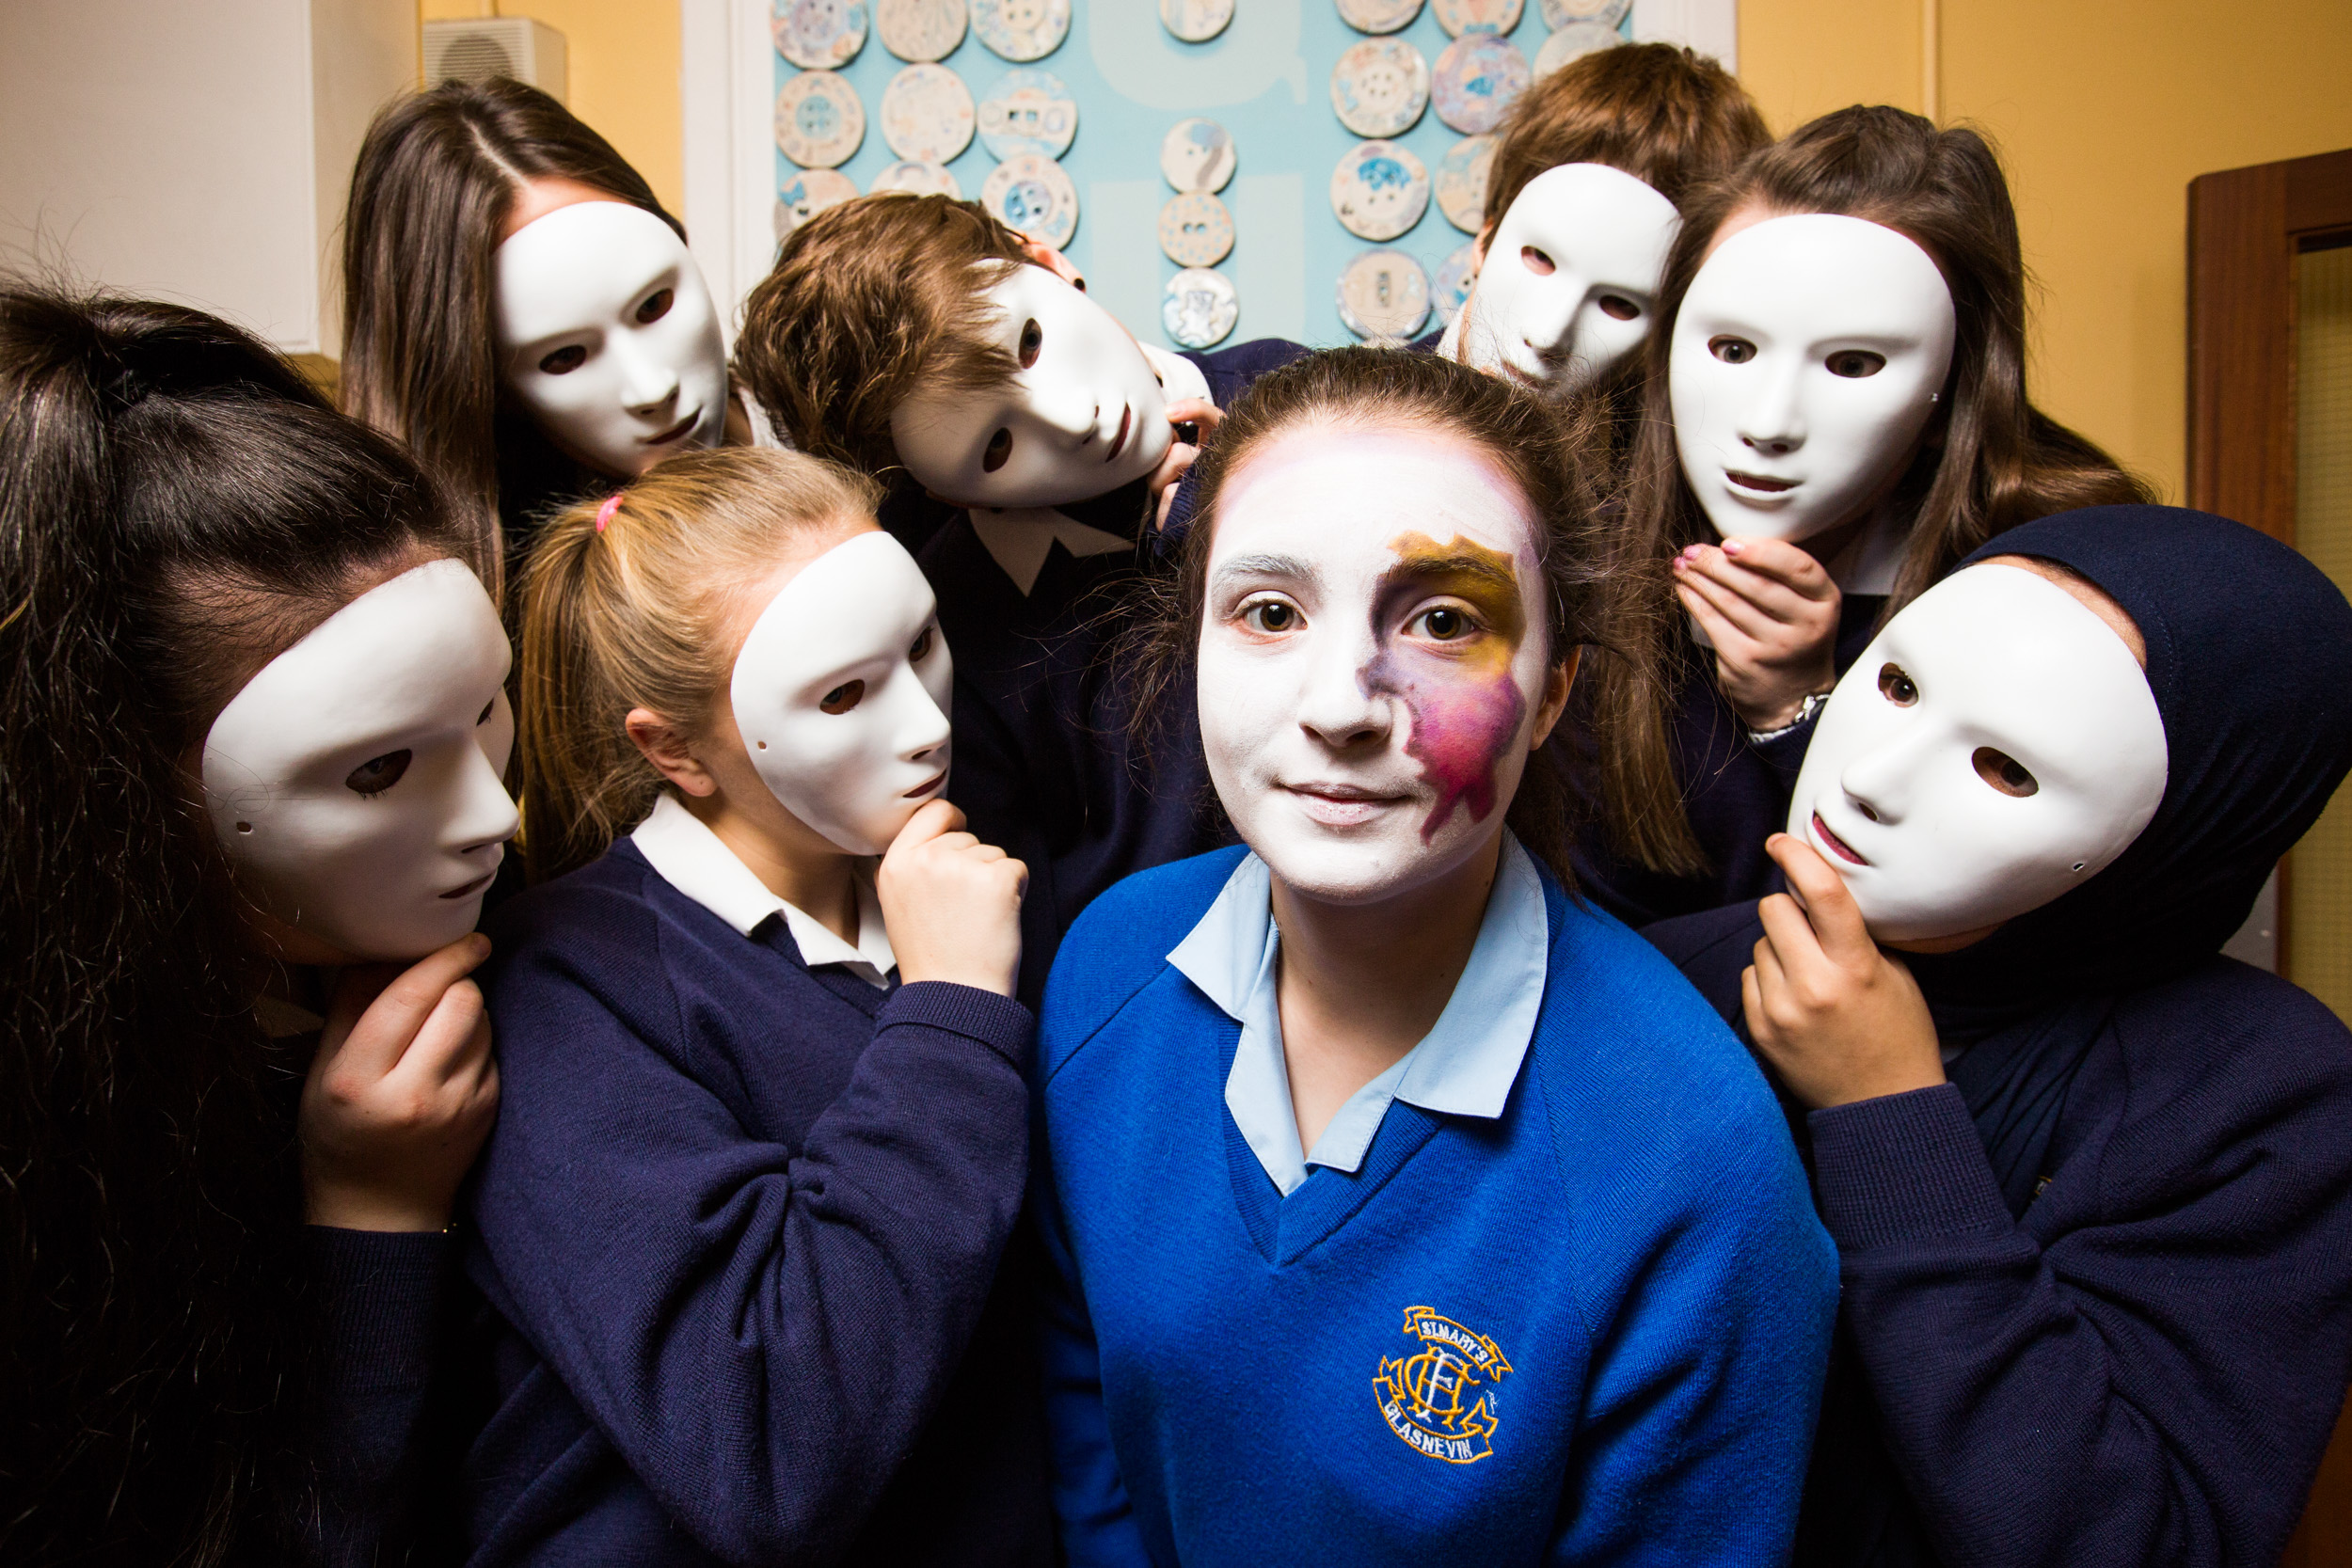 No repro fee 25-10-2016 Picture shows Lauren McCausland fifth year(with face paint); surrounded by 2nd year art students (with masks)  from St Mary’s Secondary School, H F, Glasnevin, Dublin at one of the school’s two permanent NAPD Creative Engagement Project installations ,marking the the Art Teachers’ Association of Ireland launch of the #stateoftheart campaign to raise awareness of the urgent need for change in Leaving Certificate Art highlighted by a day of action on Oct 26th.Pic:Naoise Culhane-no fee The campaign is designed to raise awareness of the urgent need for reform in the Leaving Cert Art curriculum.  Key points for change:  Marking scheme: the current system means A1s are proportionally less achievable than any other Leaving Cert subject.  Curriculum development & reform: despite requests, the Art Leaving Cert curriculum has not been revised since 1972.  Third level Art entry requirements: Leaving Cert Art itself is not required for entry to 3rd level (matriculation). However, portfolios are an essential component of entry, but aren’t covered within the curriculum. This puts extra financial and time pressure on students during the crucial Leaving Cert year.  It is essential that the Department of Education, National Council for Curriculum and Assessment (NCCA) and State Examination Commission (SEC) work together with art teachers, parent and student groups and relevant partners in culture and industry to design and implement a new Leaving Cert curriculum, not simply assessment reform.  Please support our day of action on 26th of October 2016; to raise awareness and promote change for students of today and to ensure the future creativity of our country.  Please visit our website www.artteachers.ie for further information. Your support in this campaign is important and greatly appreciated.  For Further info Please contact www.artteachers.ie or  Nadine McDonogh Cunningham – President   atai.president@gmail.com  Pic:Naoise Culhane-no fee